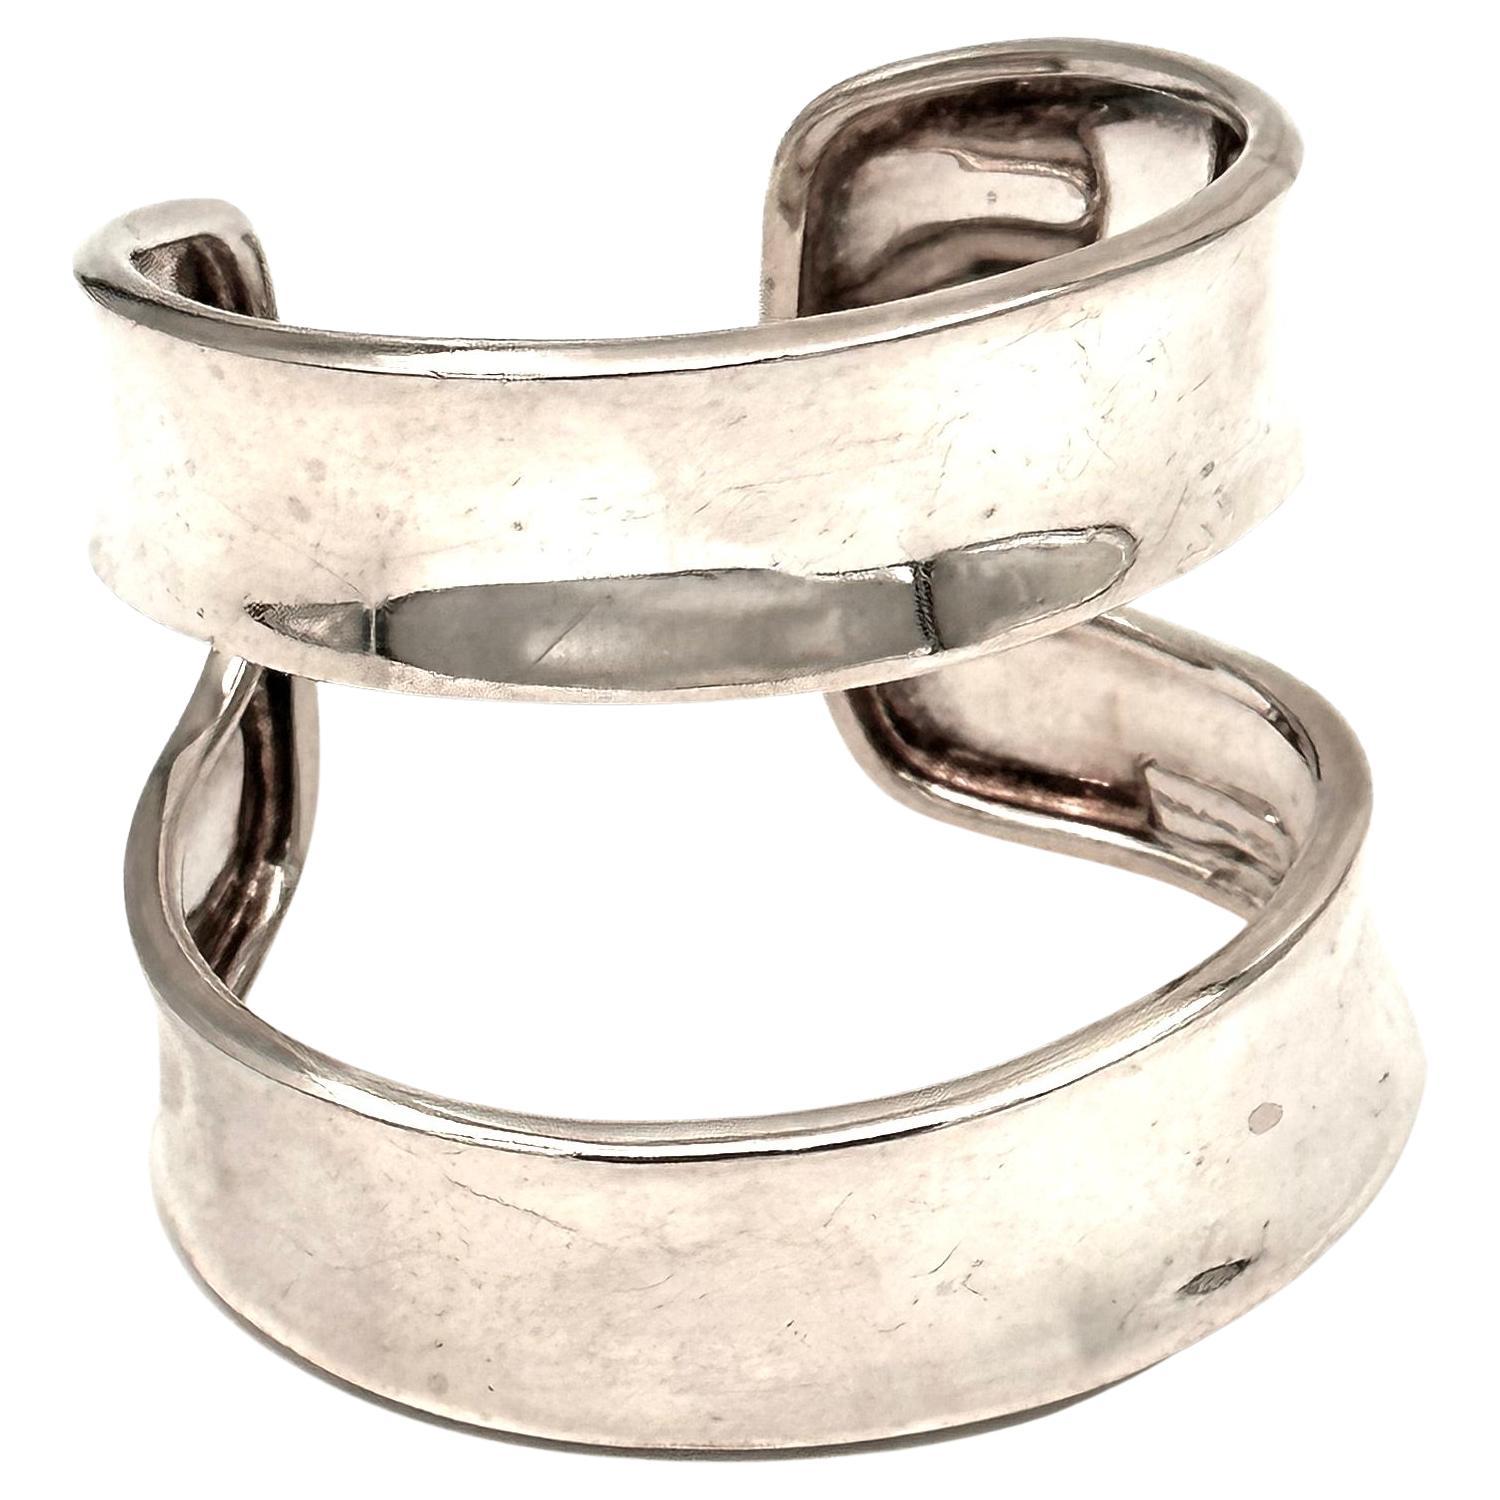 This double band cuff created by hand by Robert Lee Morris was made for a 2003 Donna Karan fall runway show. Robert Lee Morris is well known for his bold, graphic runway pieces, and this spare but bold silver cuff is a prize for the silver cuff